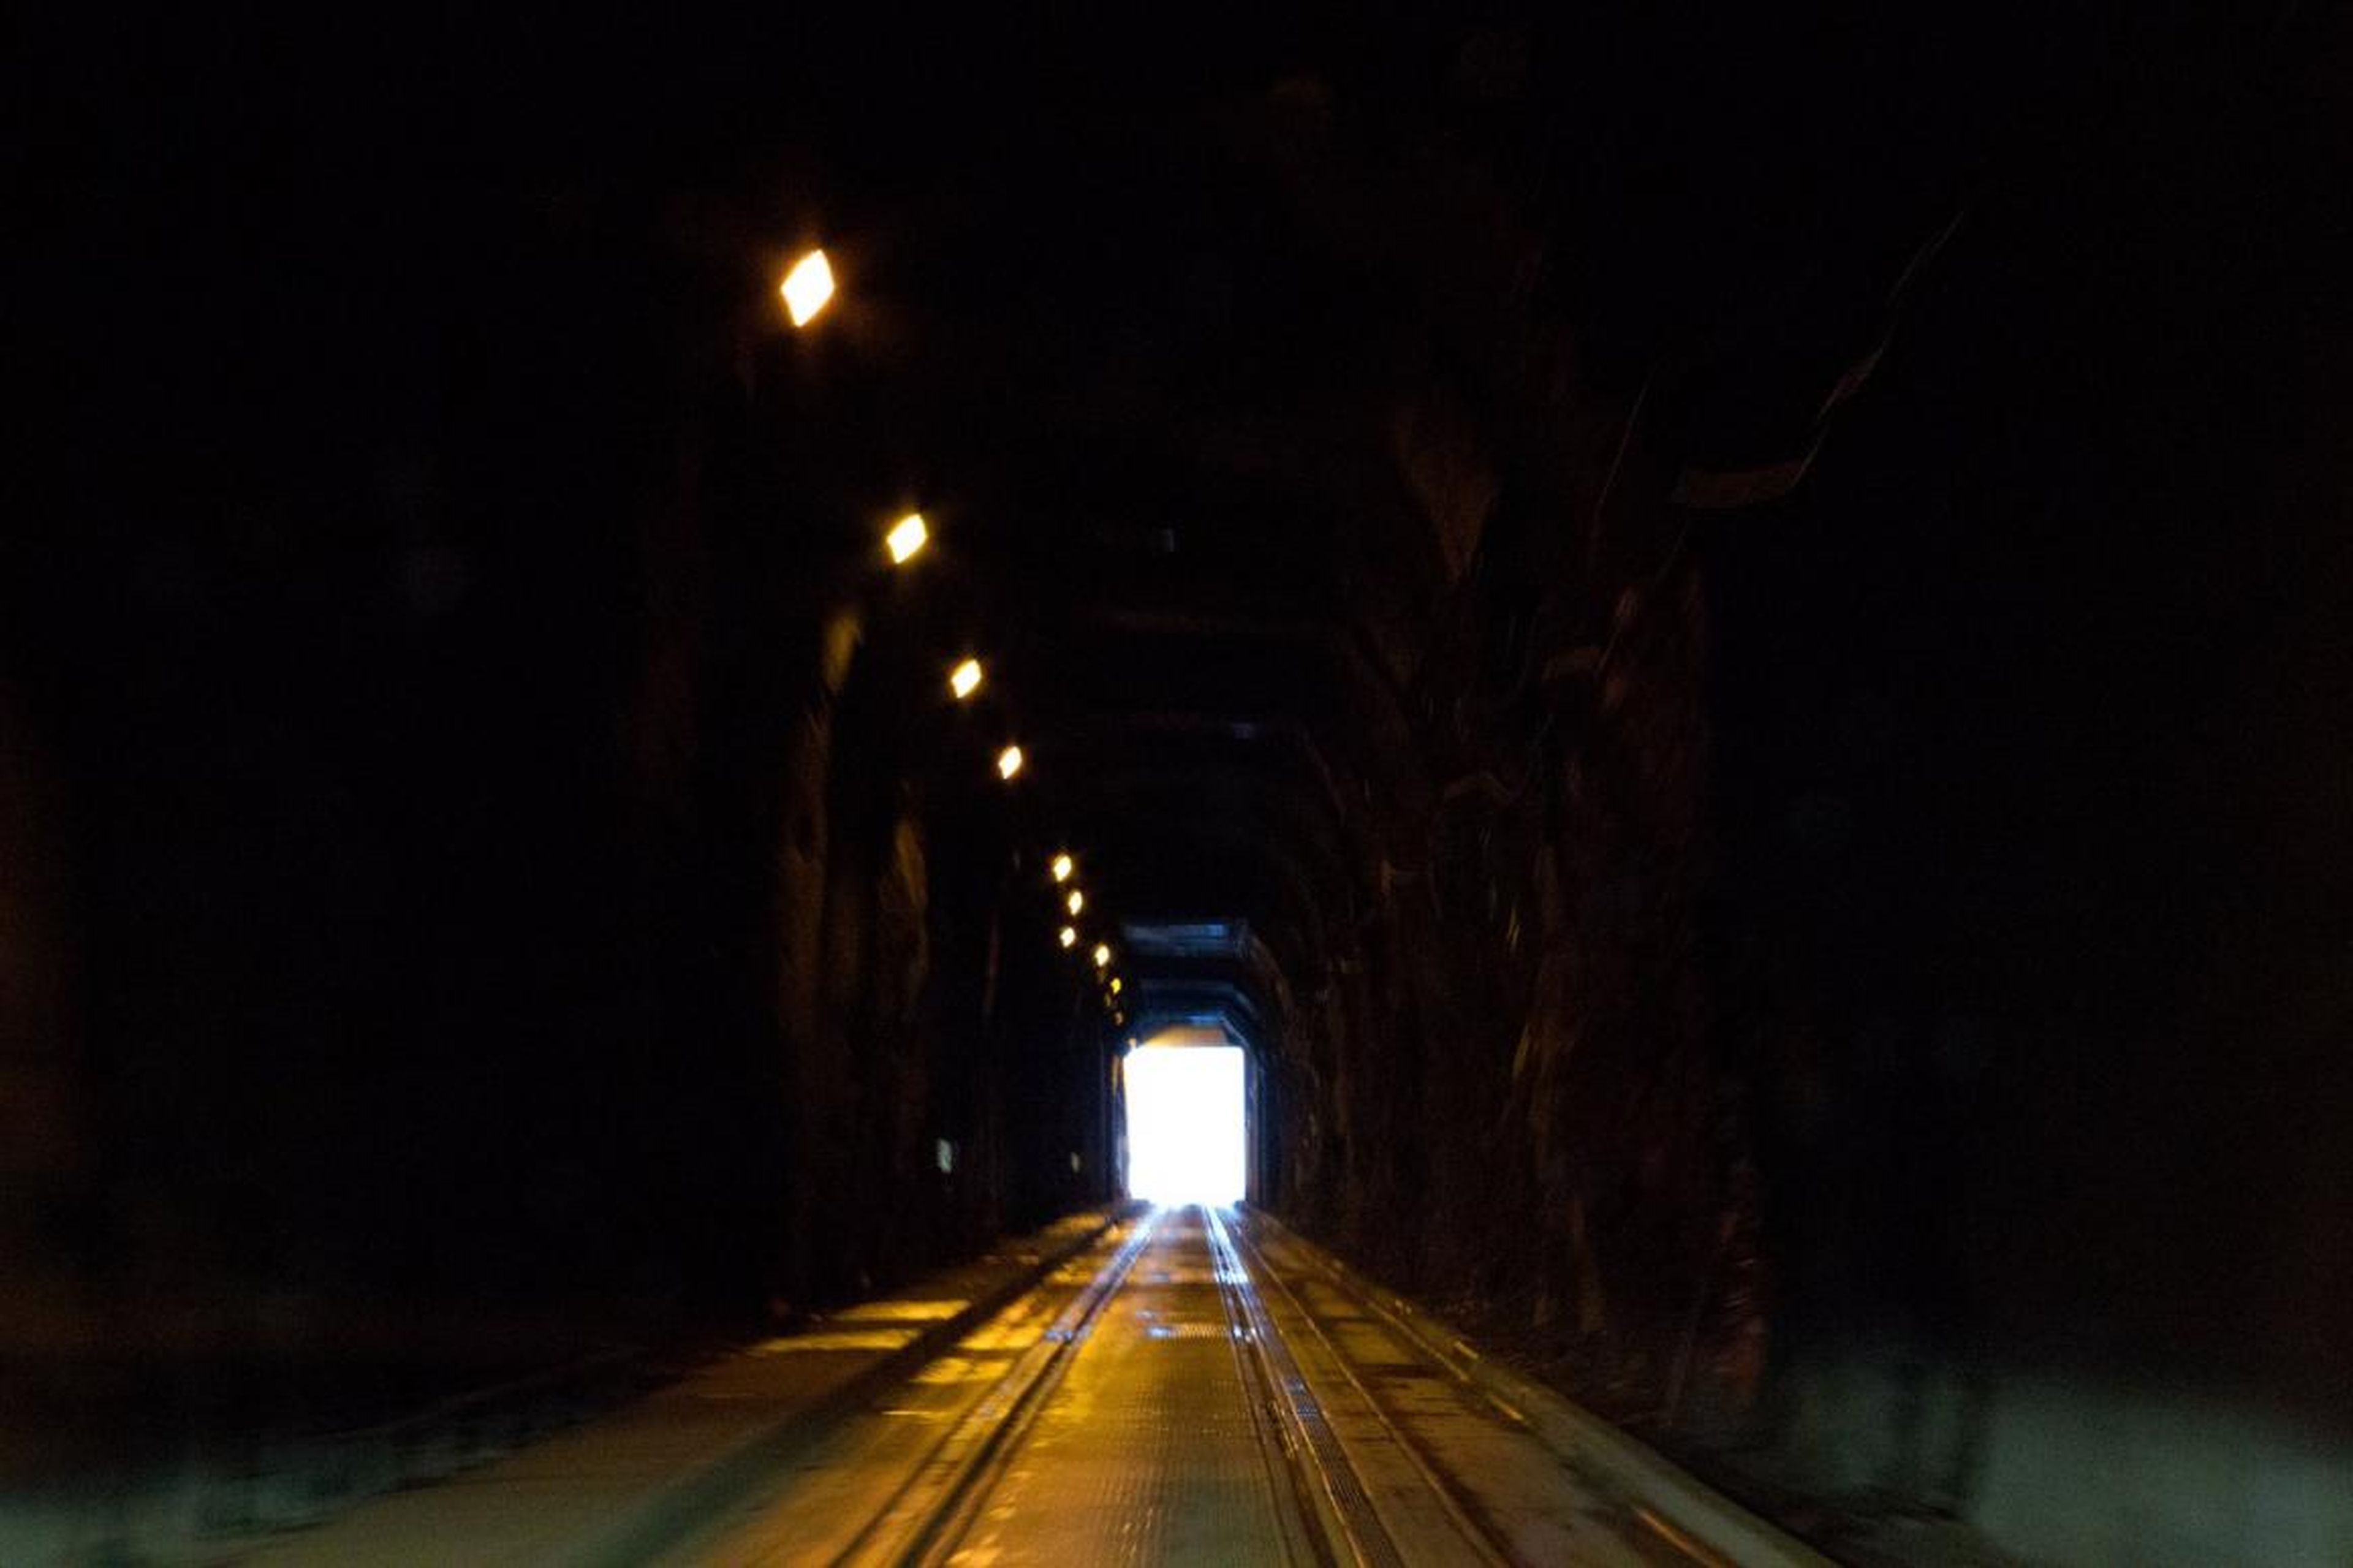 "Traveling through the tunnel, it makes you feel a little claustrophobic. By the time you're nearing the end, this is definitely a welcome sight."